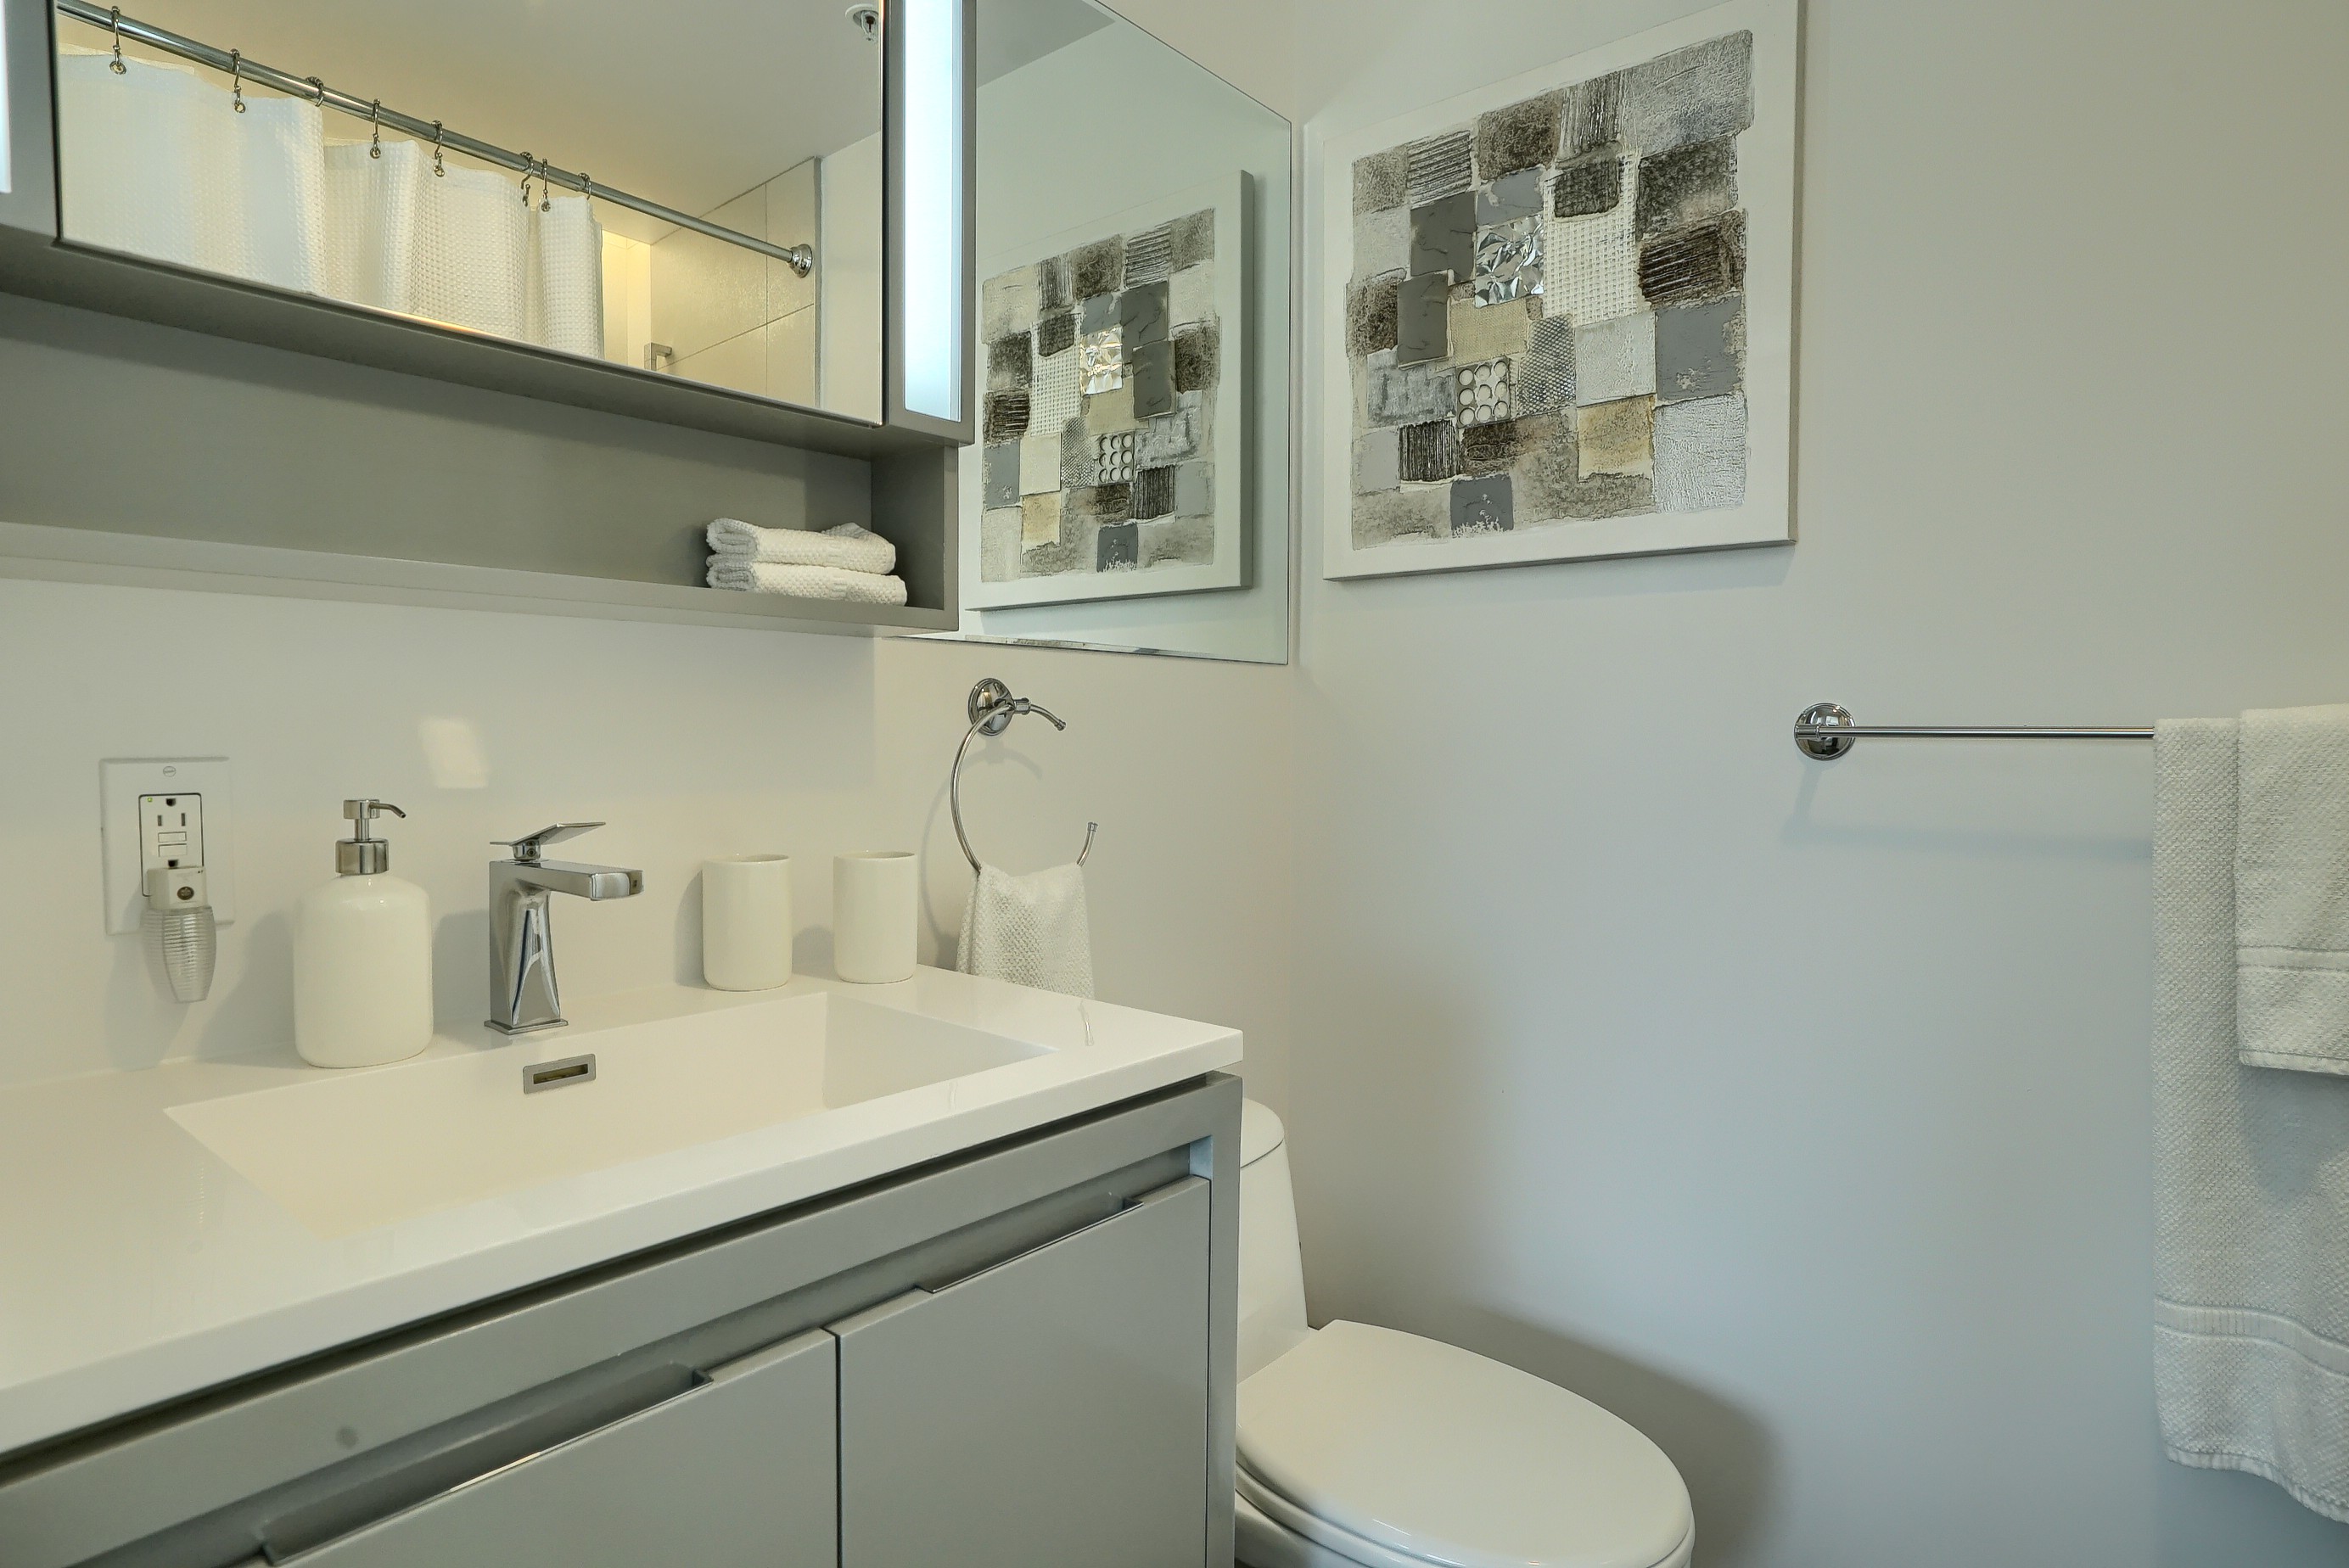 Angled view of the second bathroom in this short term furnished apartment in montreal. Over-sized white sink with designer faucet and large well-lit mirror 